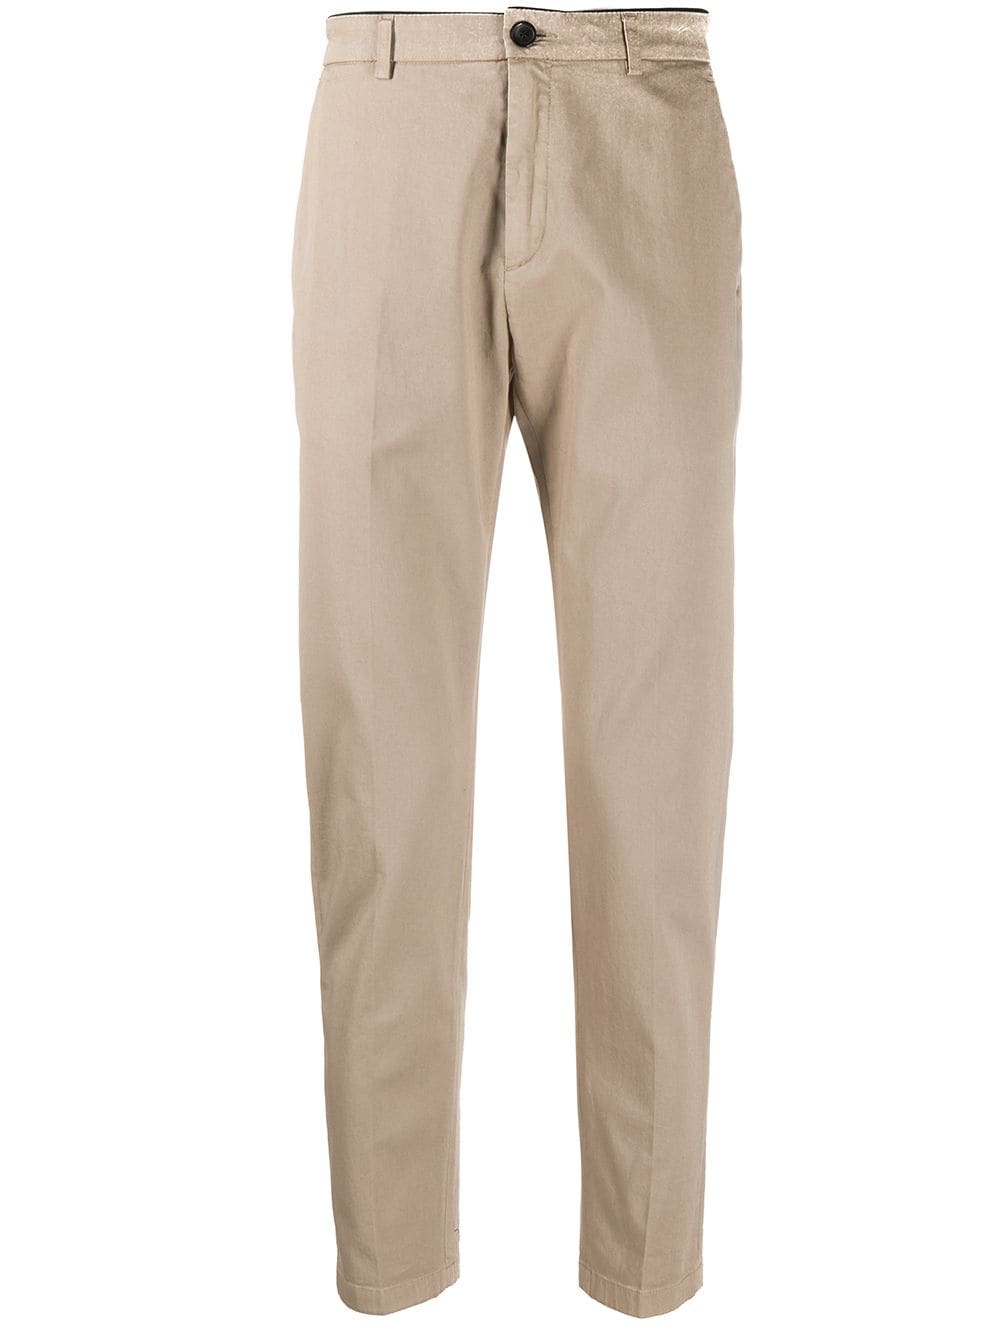 DEPARTMENT 5 SLIM FIT PLEATED DETAIL CHINO TROUSERS